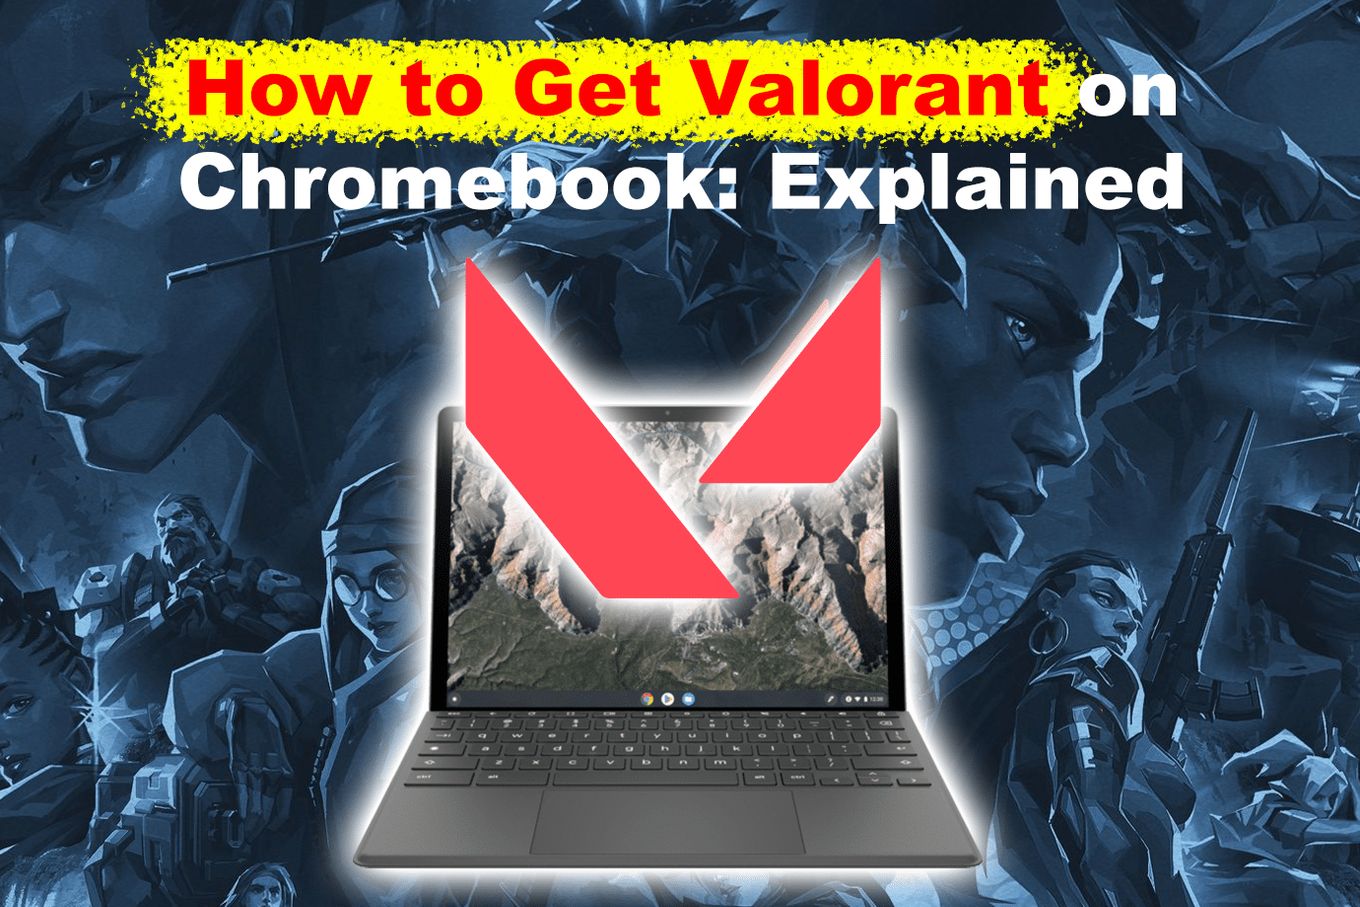 How To Get Valorant On Chromebook